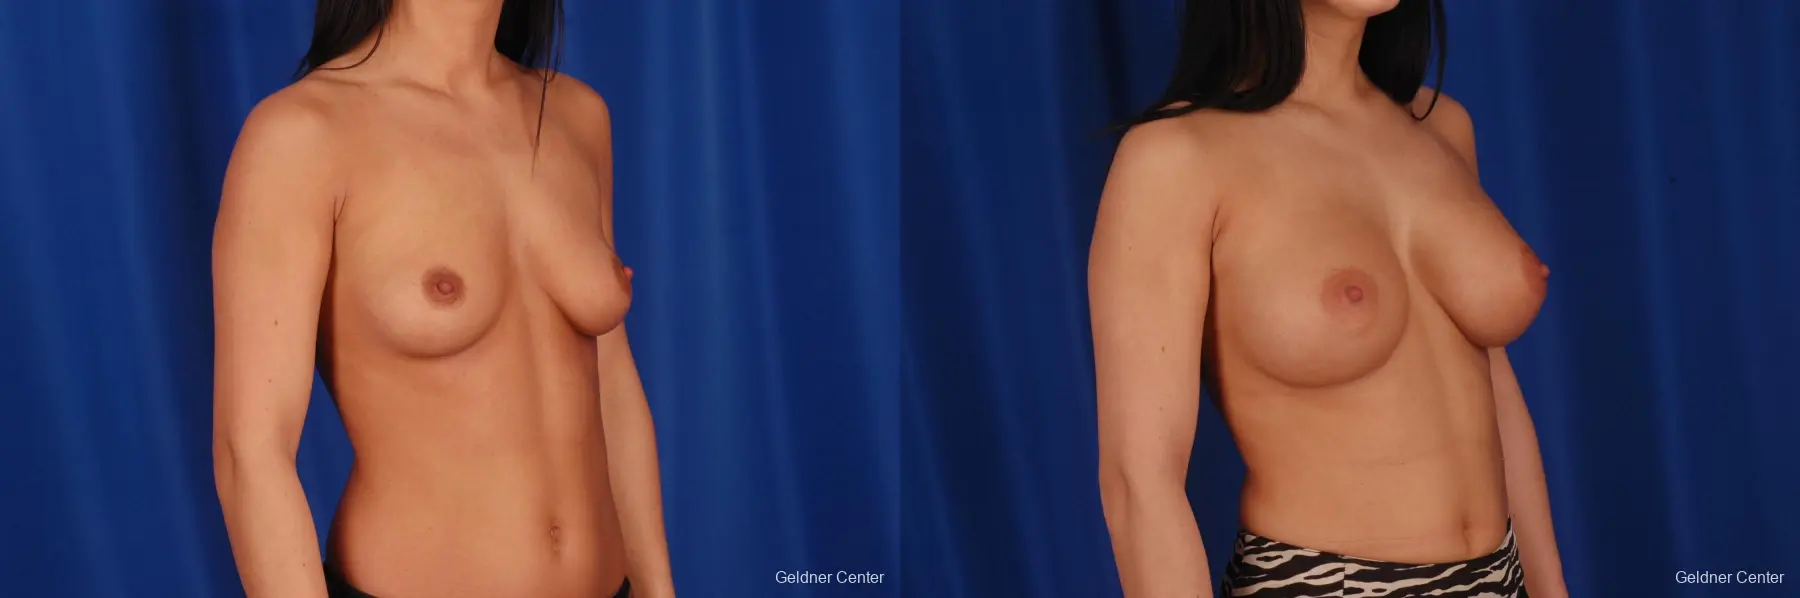 Breast Augmentation Lake Shore Dr, Chicago 2402 - Before and After 3